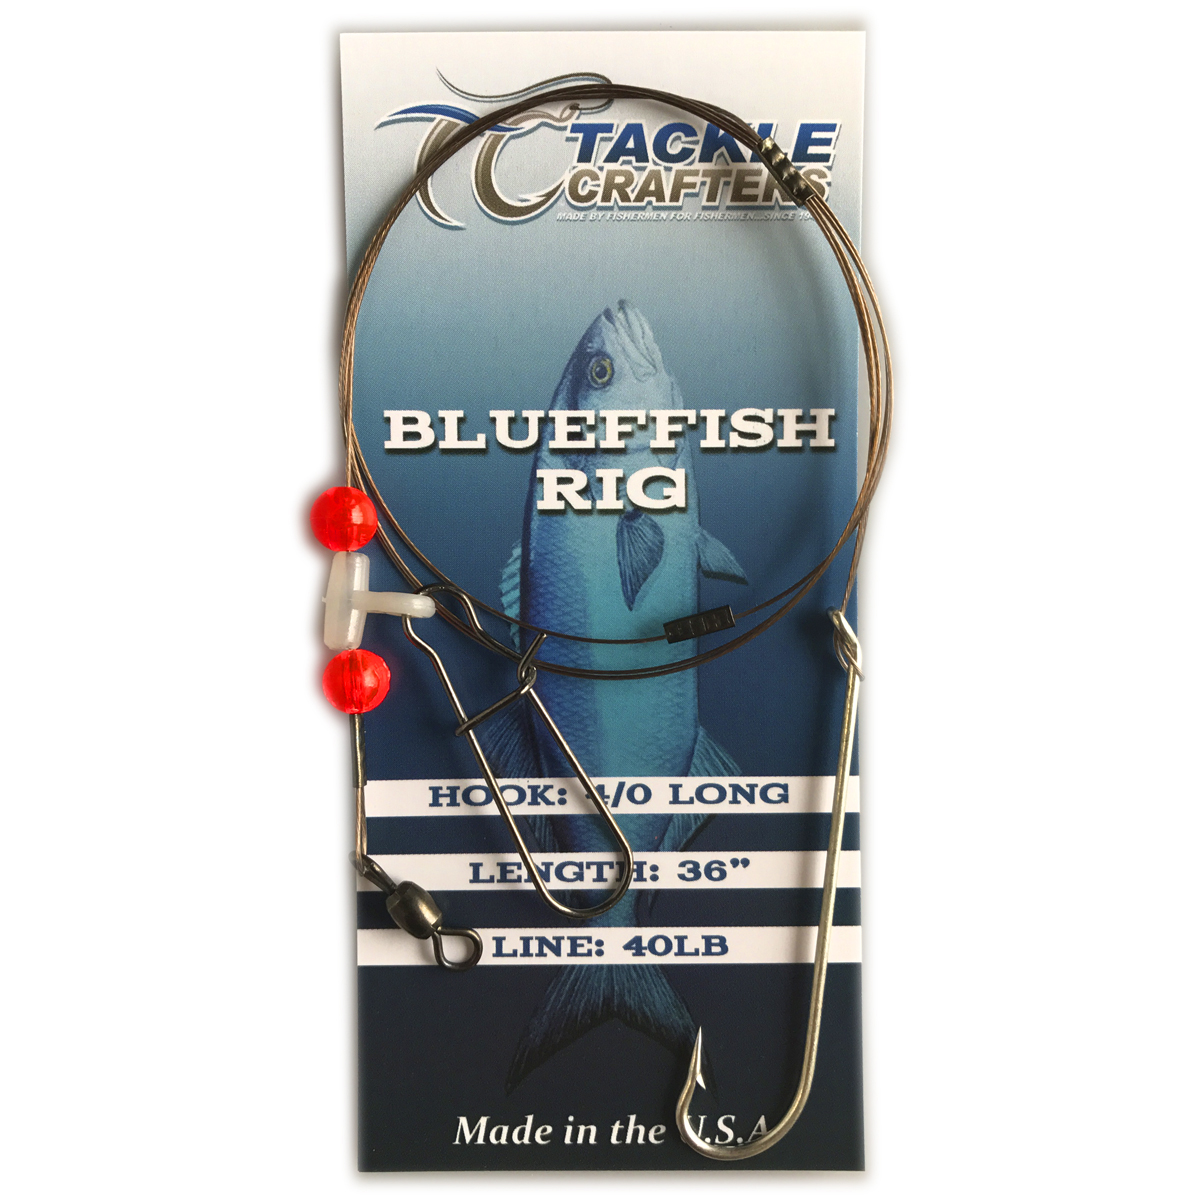 https://www.tacklecrafters.com/wp-content/uploads/2016/03/Bluefish_Rig_Main_Photo.jpg